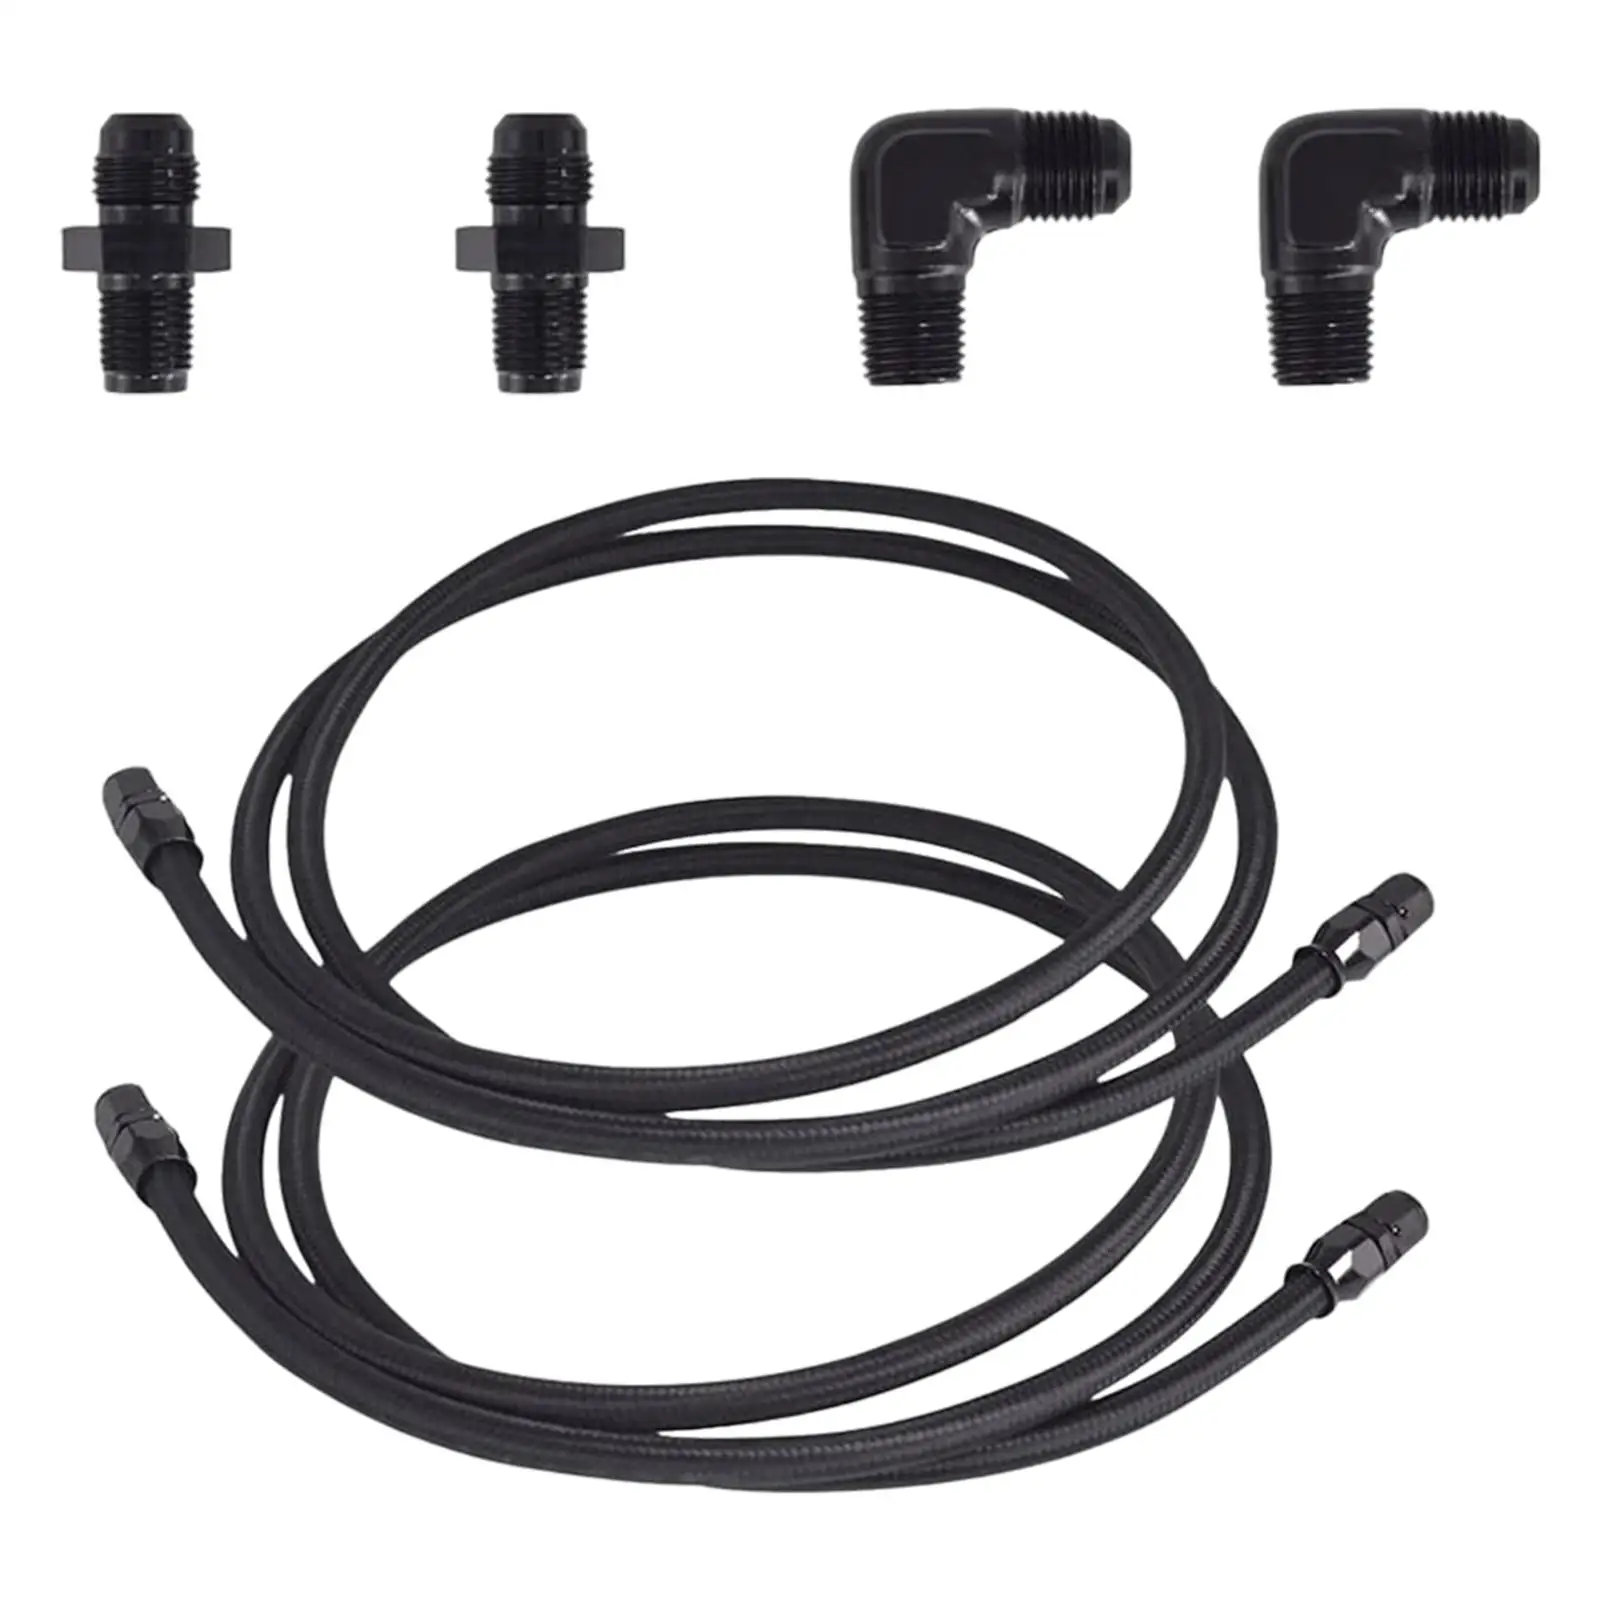 6AN PTFE Line Fitting Kit Professional 2 AN6-1/4 NPT 90 Degrees Accessory